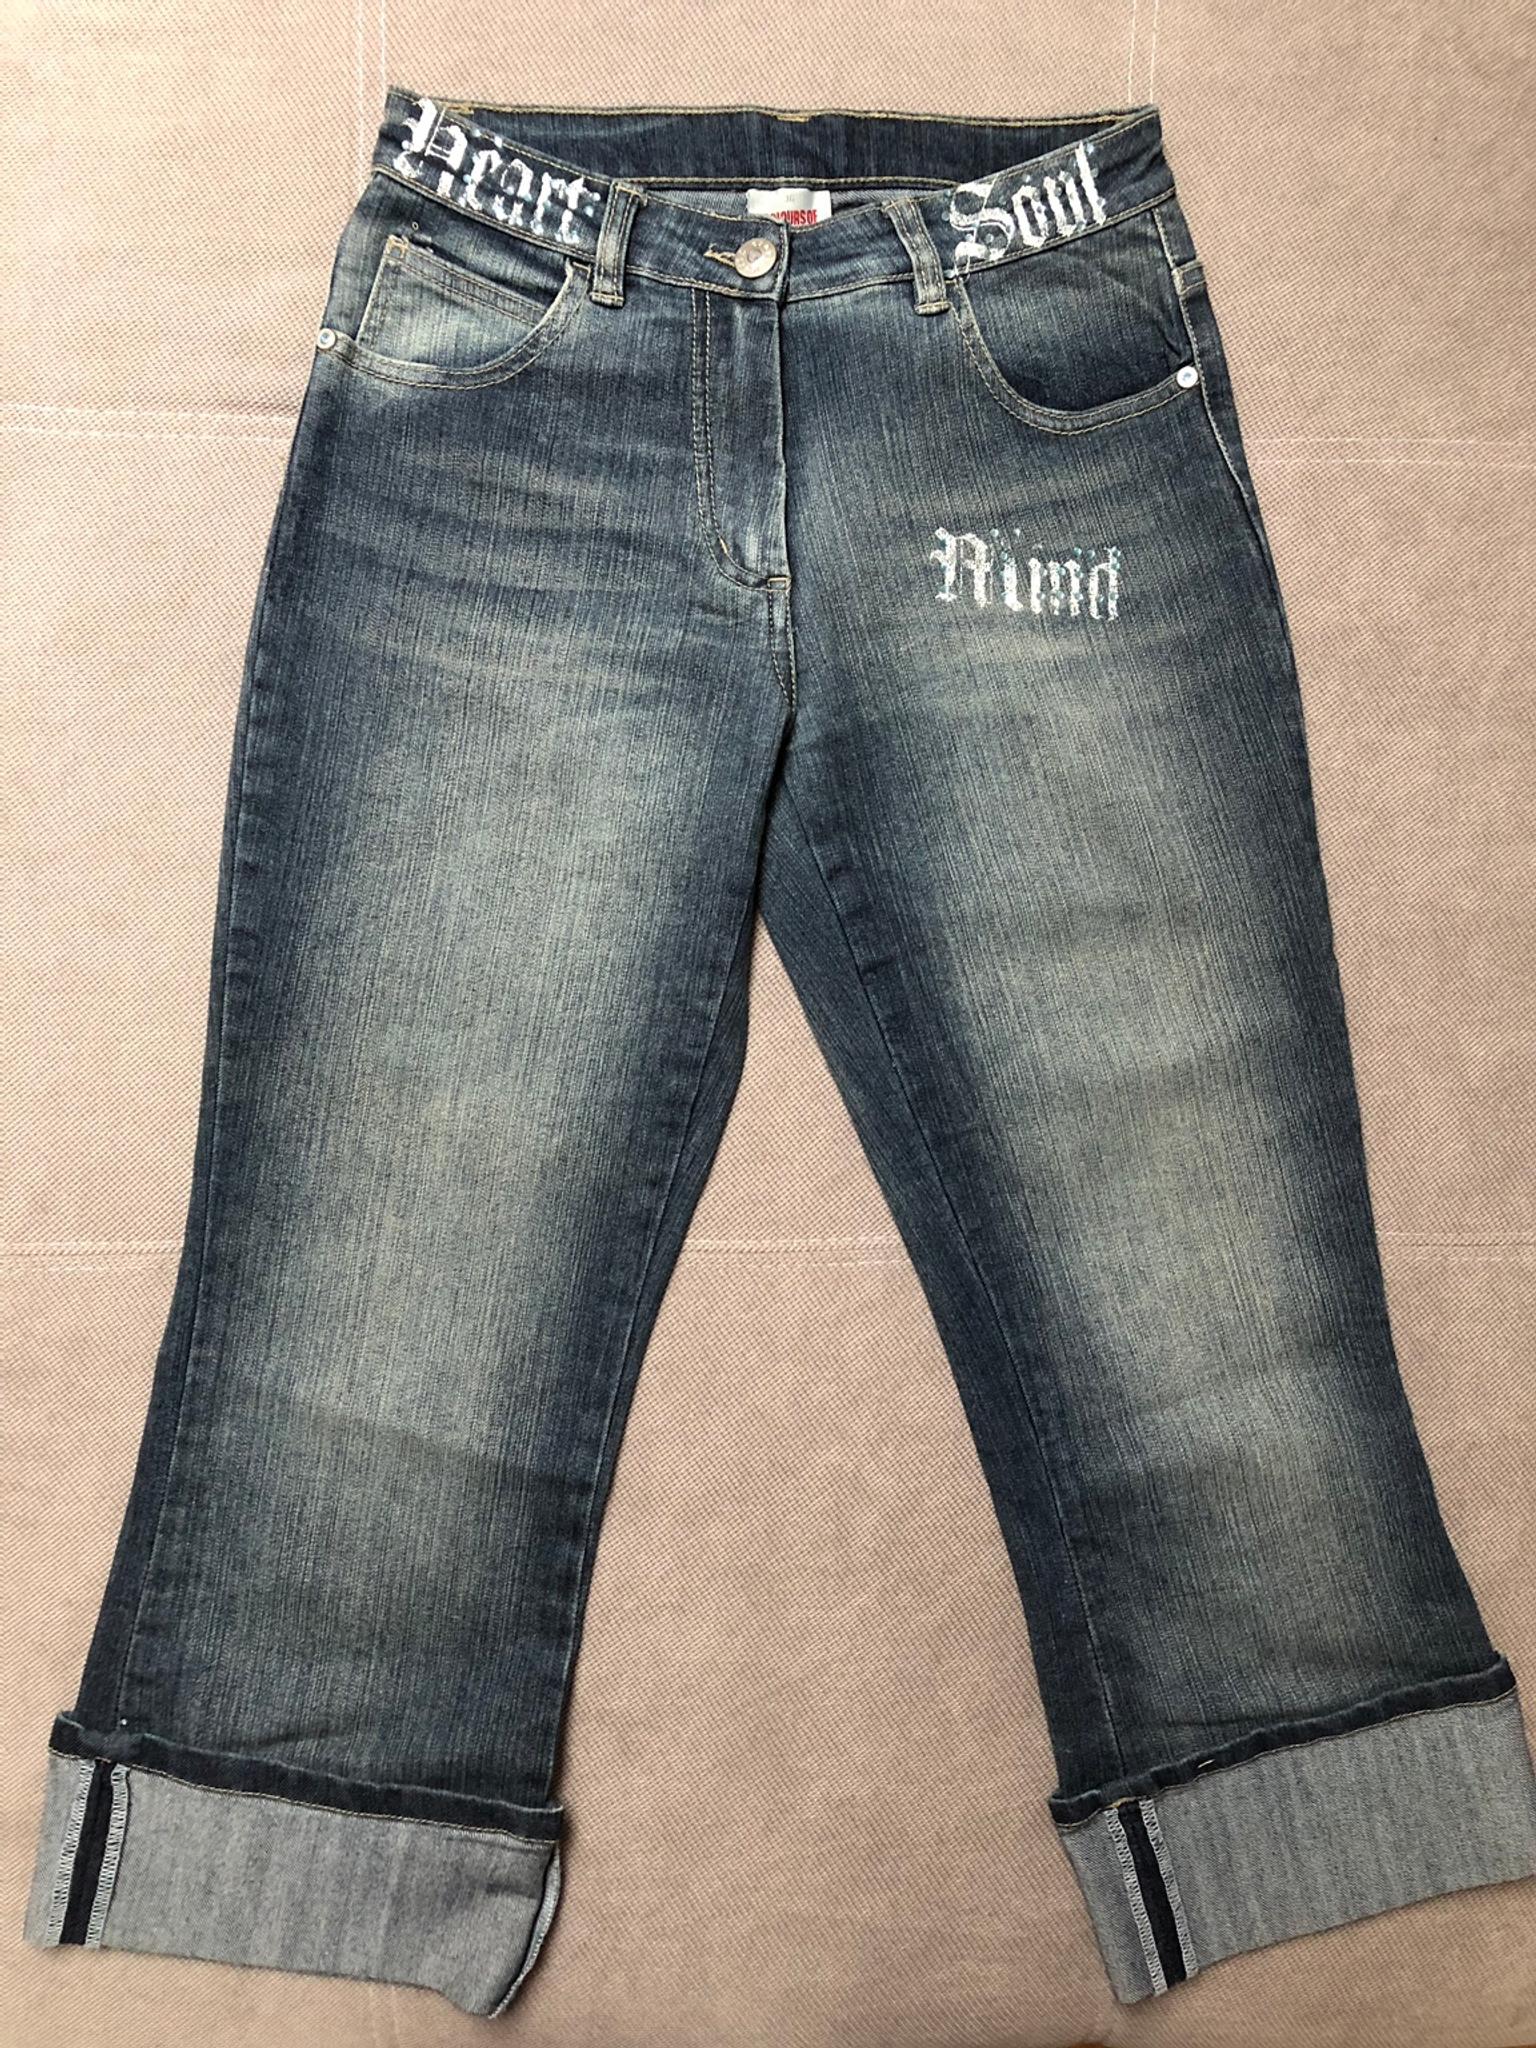 Jeans 7 8 Sommer 36 In Forchheim For 5 00 For Sale Shpock